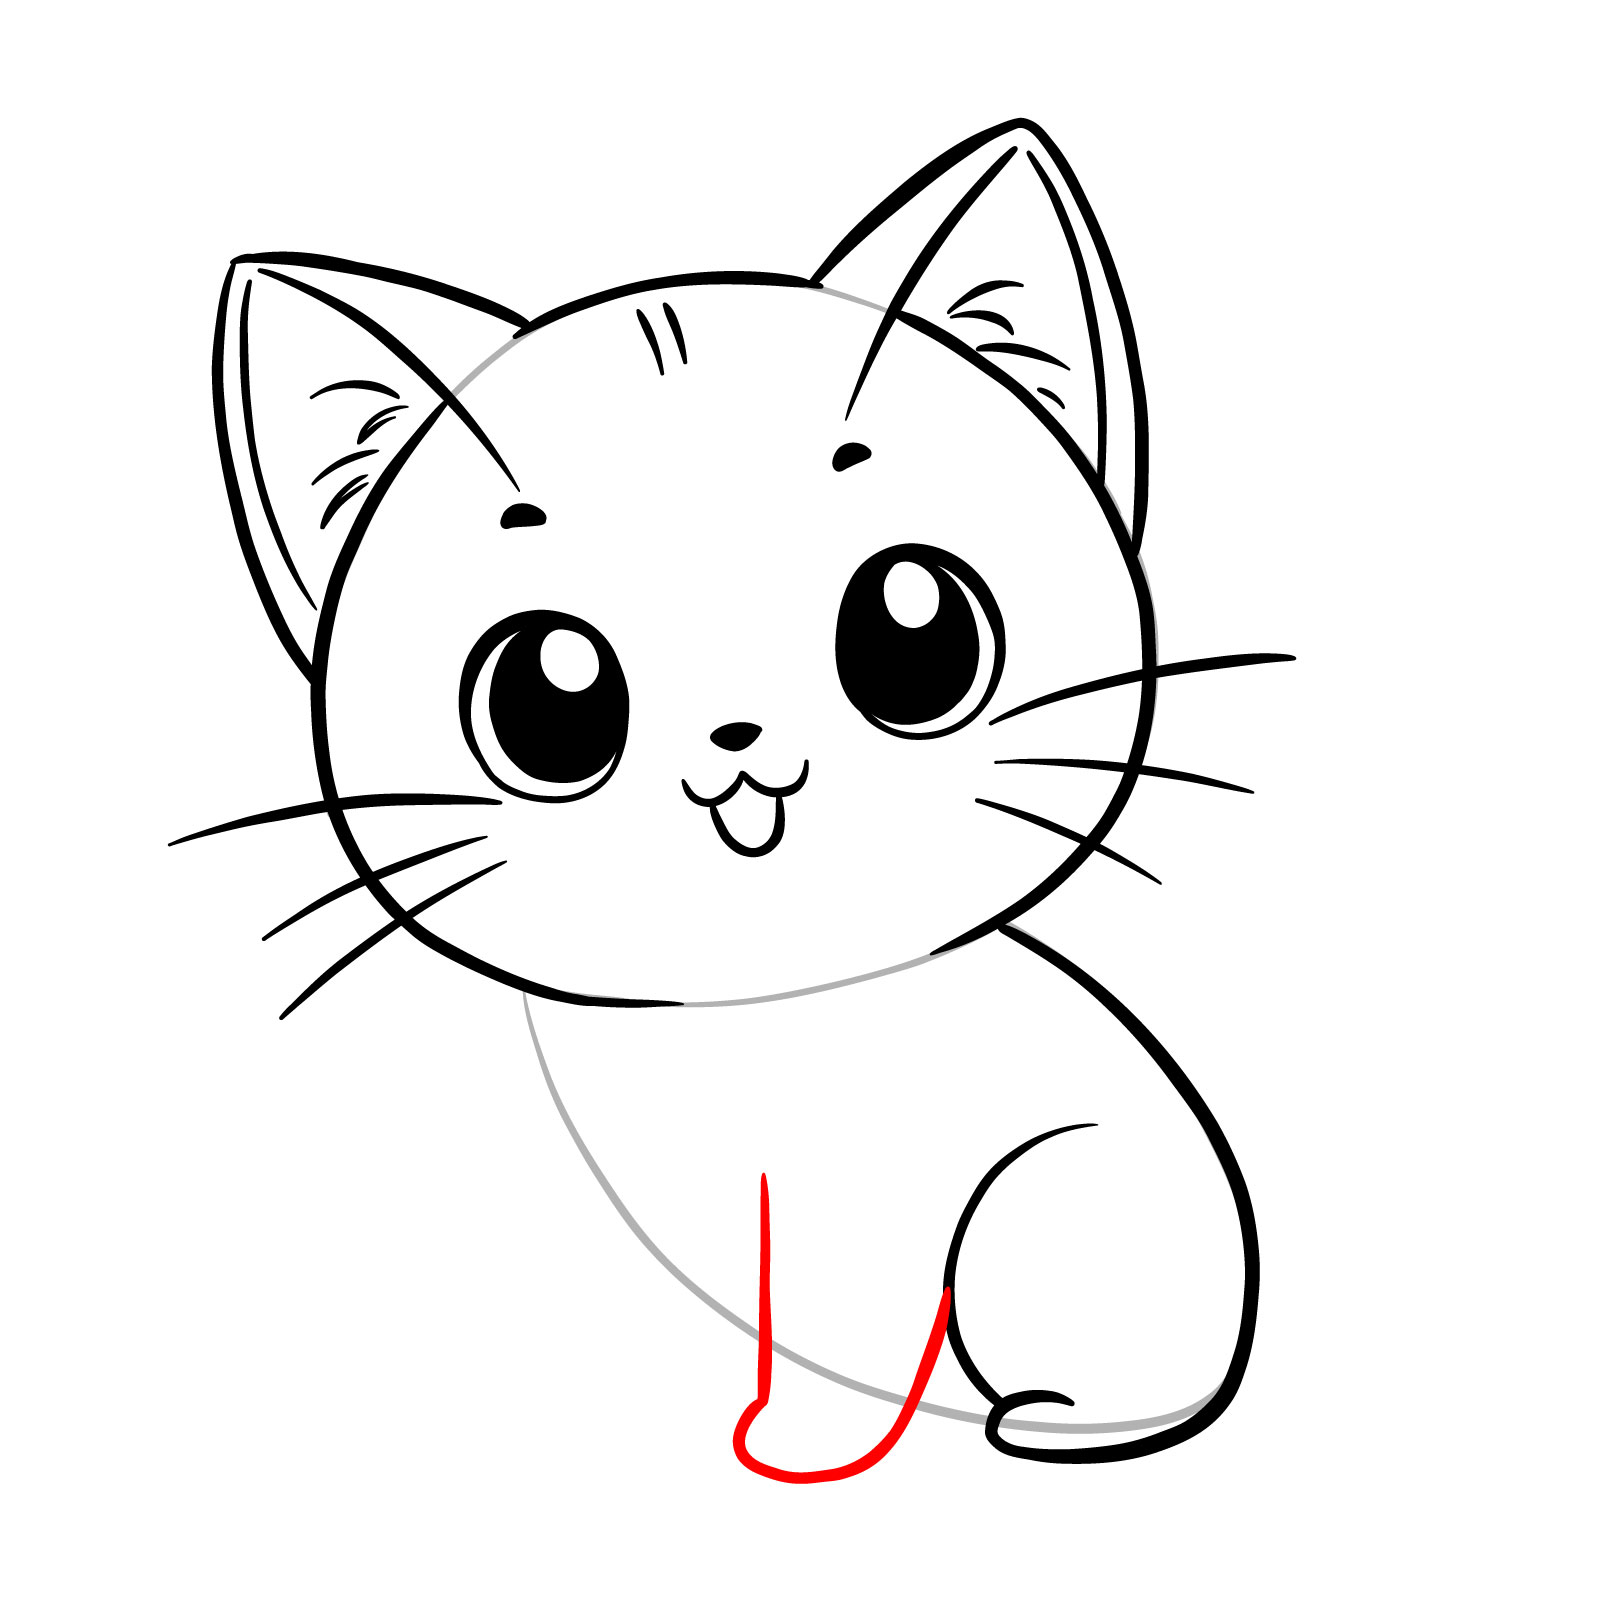 How to draw an anime cat - step 08